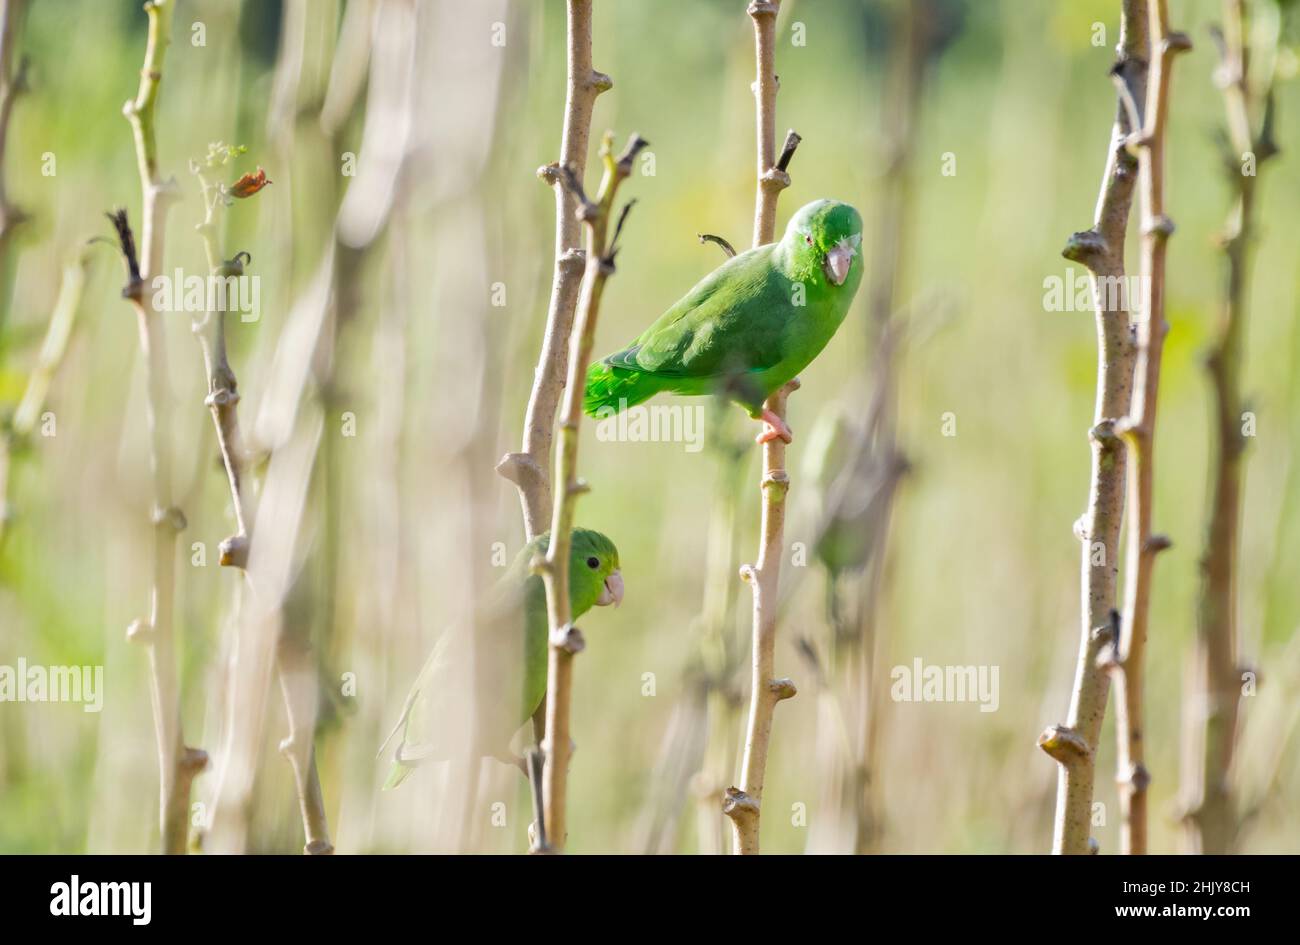 A pair of Green-rumped Parrotlets, Forpus passerinus, eating okra and foraging in an agricultural field in the Caribbean. Stock Photo